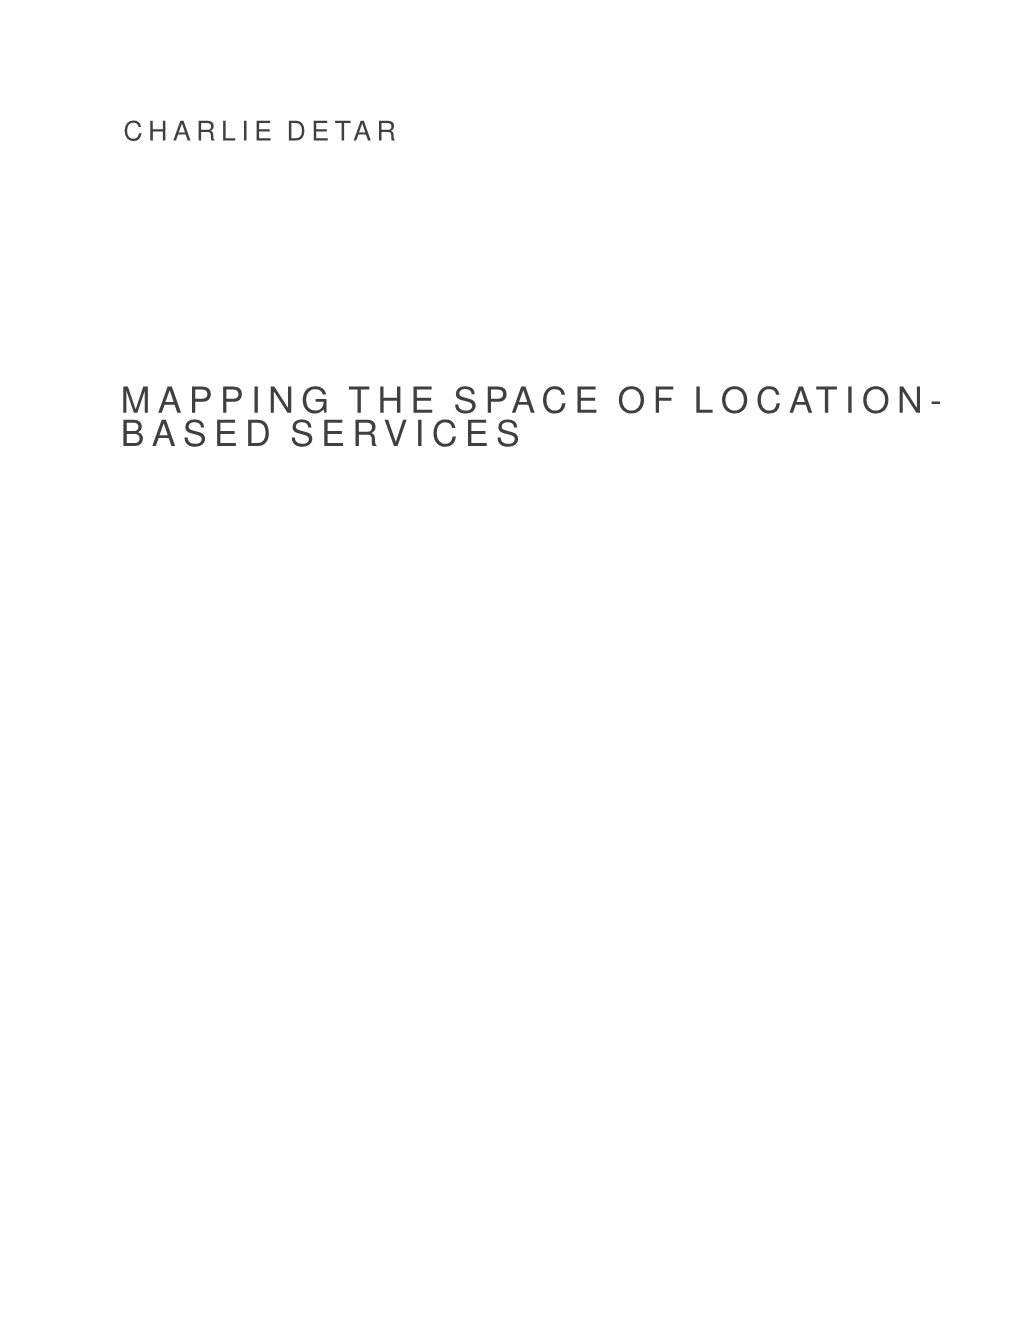 Mapping the Space of Location-Based Services 5